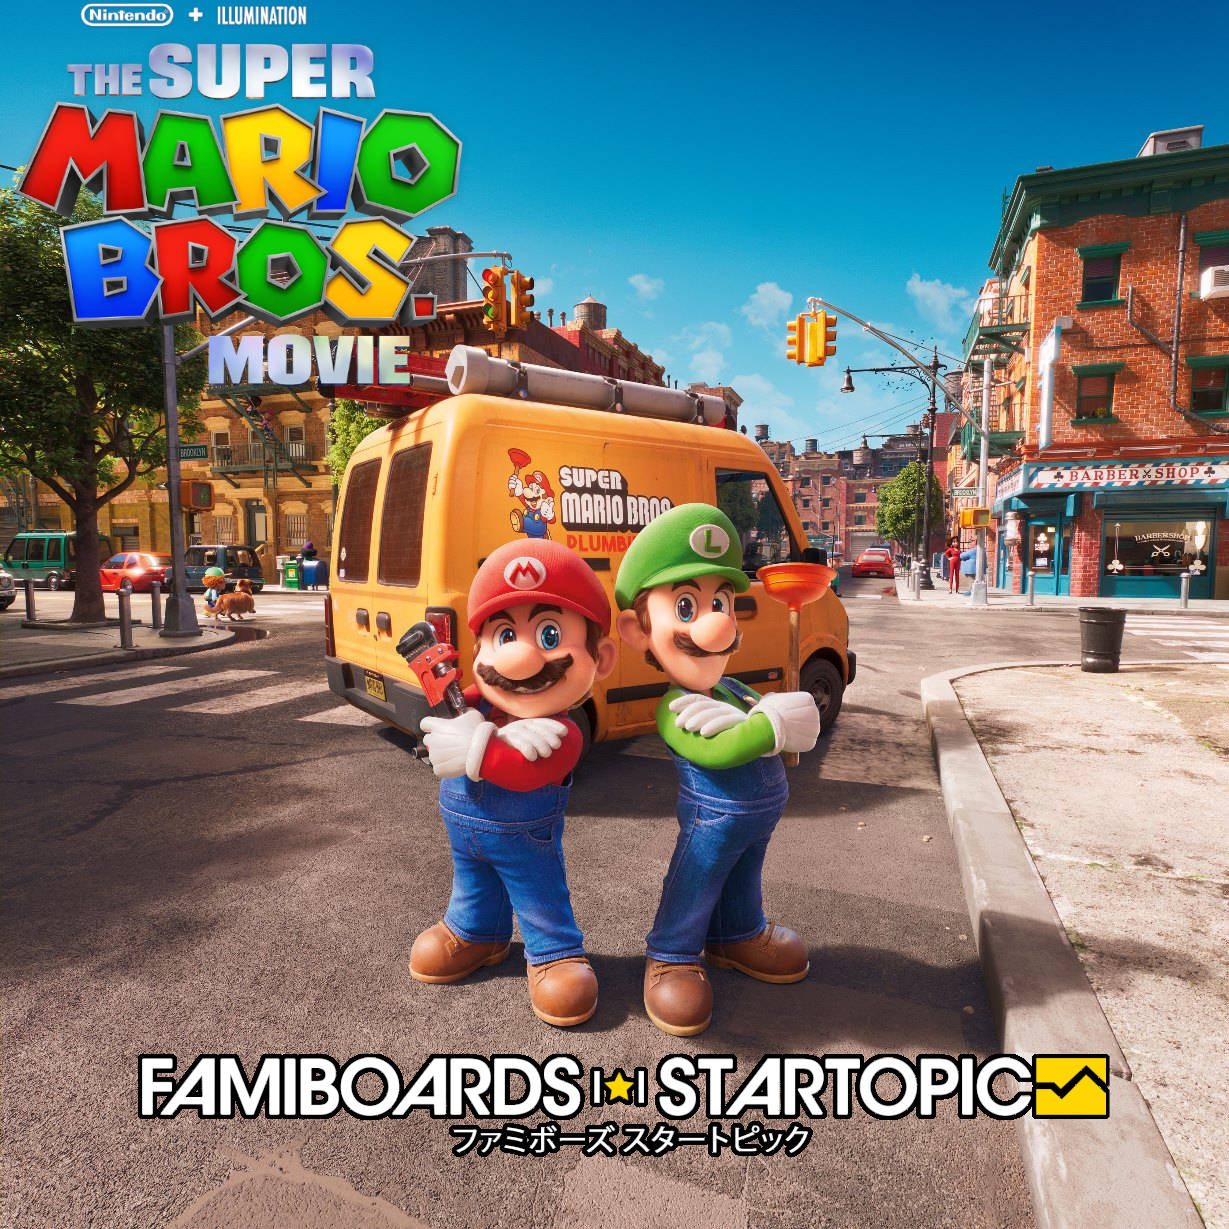 The Super Mario Bros Plumbing website is hilarious you can call